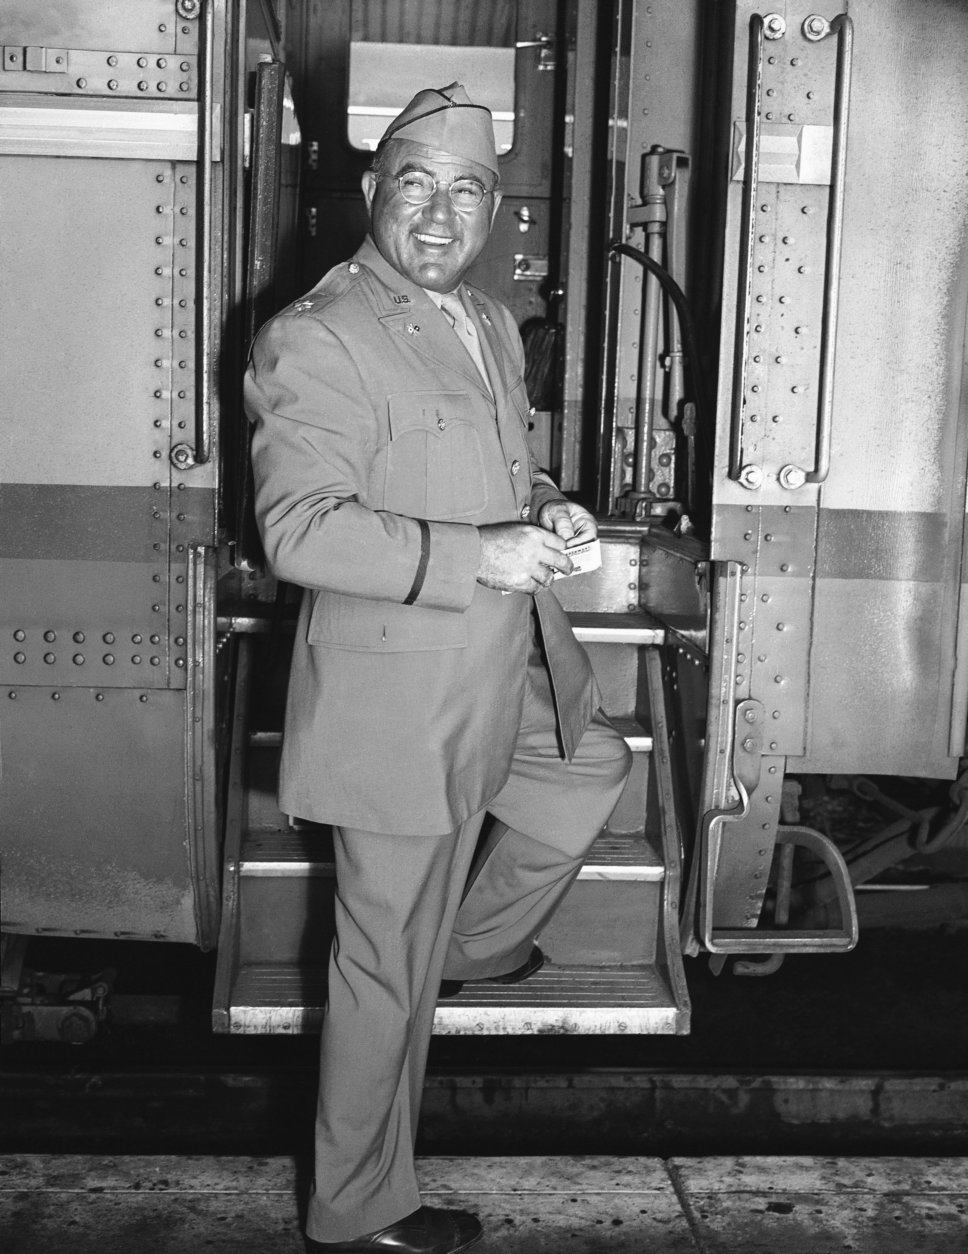 Major Hal Roach, noted motion picture producer, leaves Hollywood to take up his duties with the Signal Corps of the U.S. Army in Washington on July 29, 1942. Departure marks the first suspension of personal motion picture production for the first time since his entry into the business twenty seven years ago. During Roachs absence, his staff will carry on in production at the studio that bears his name. (AP Photo)